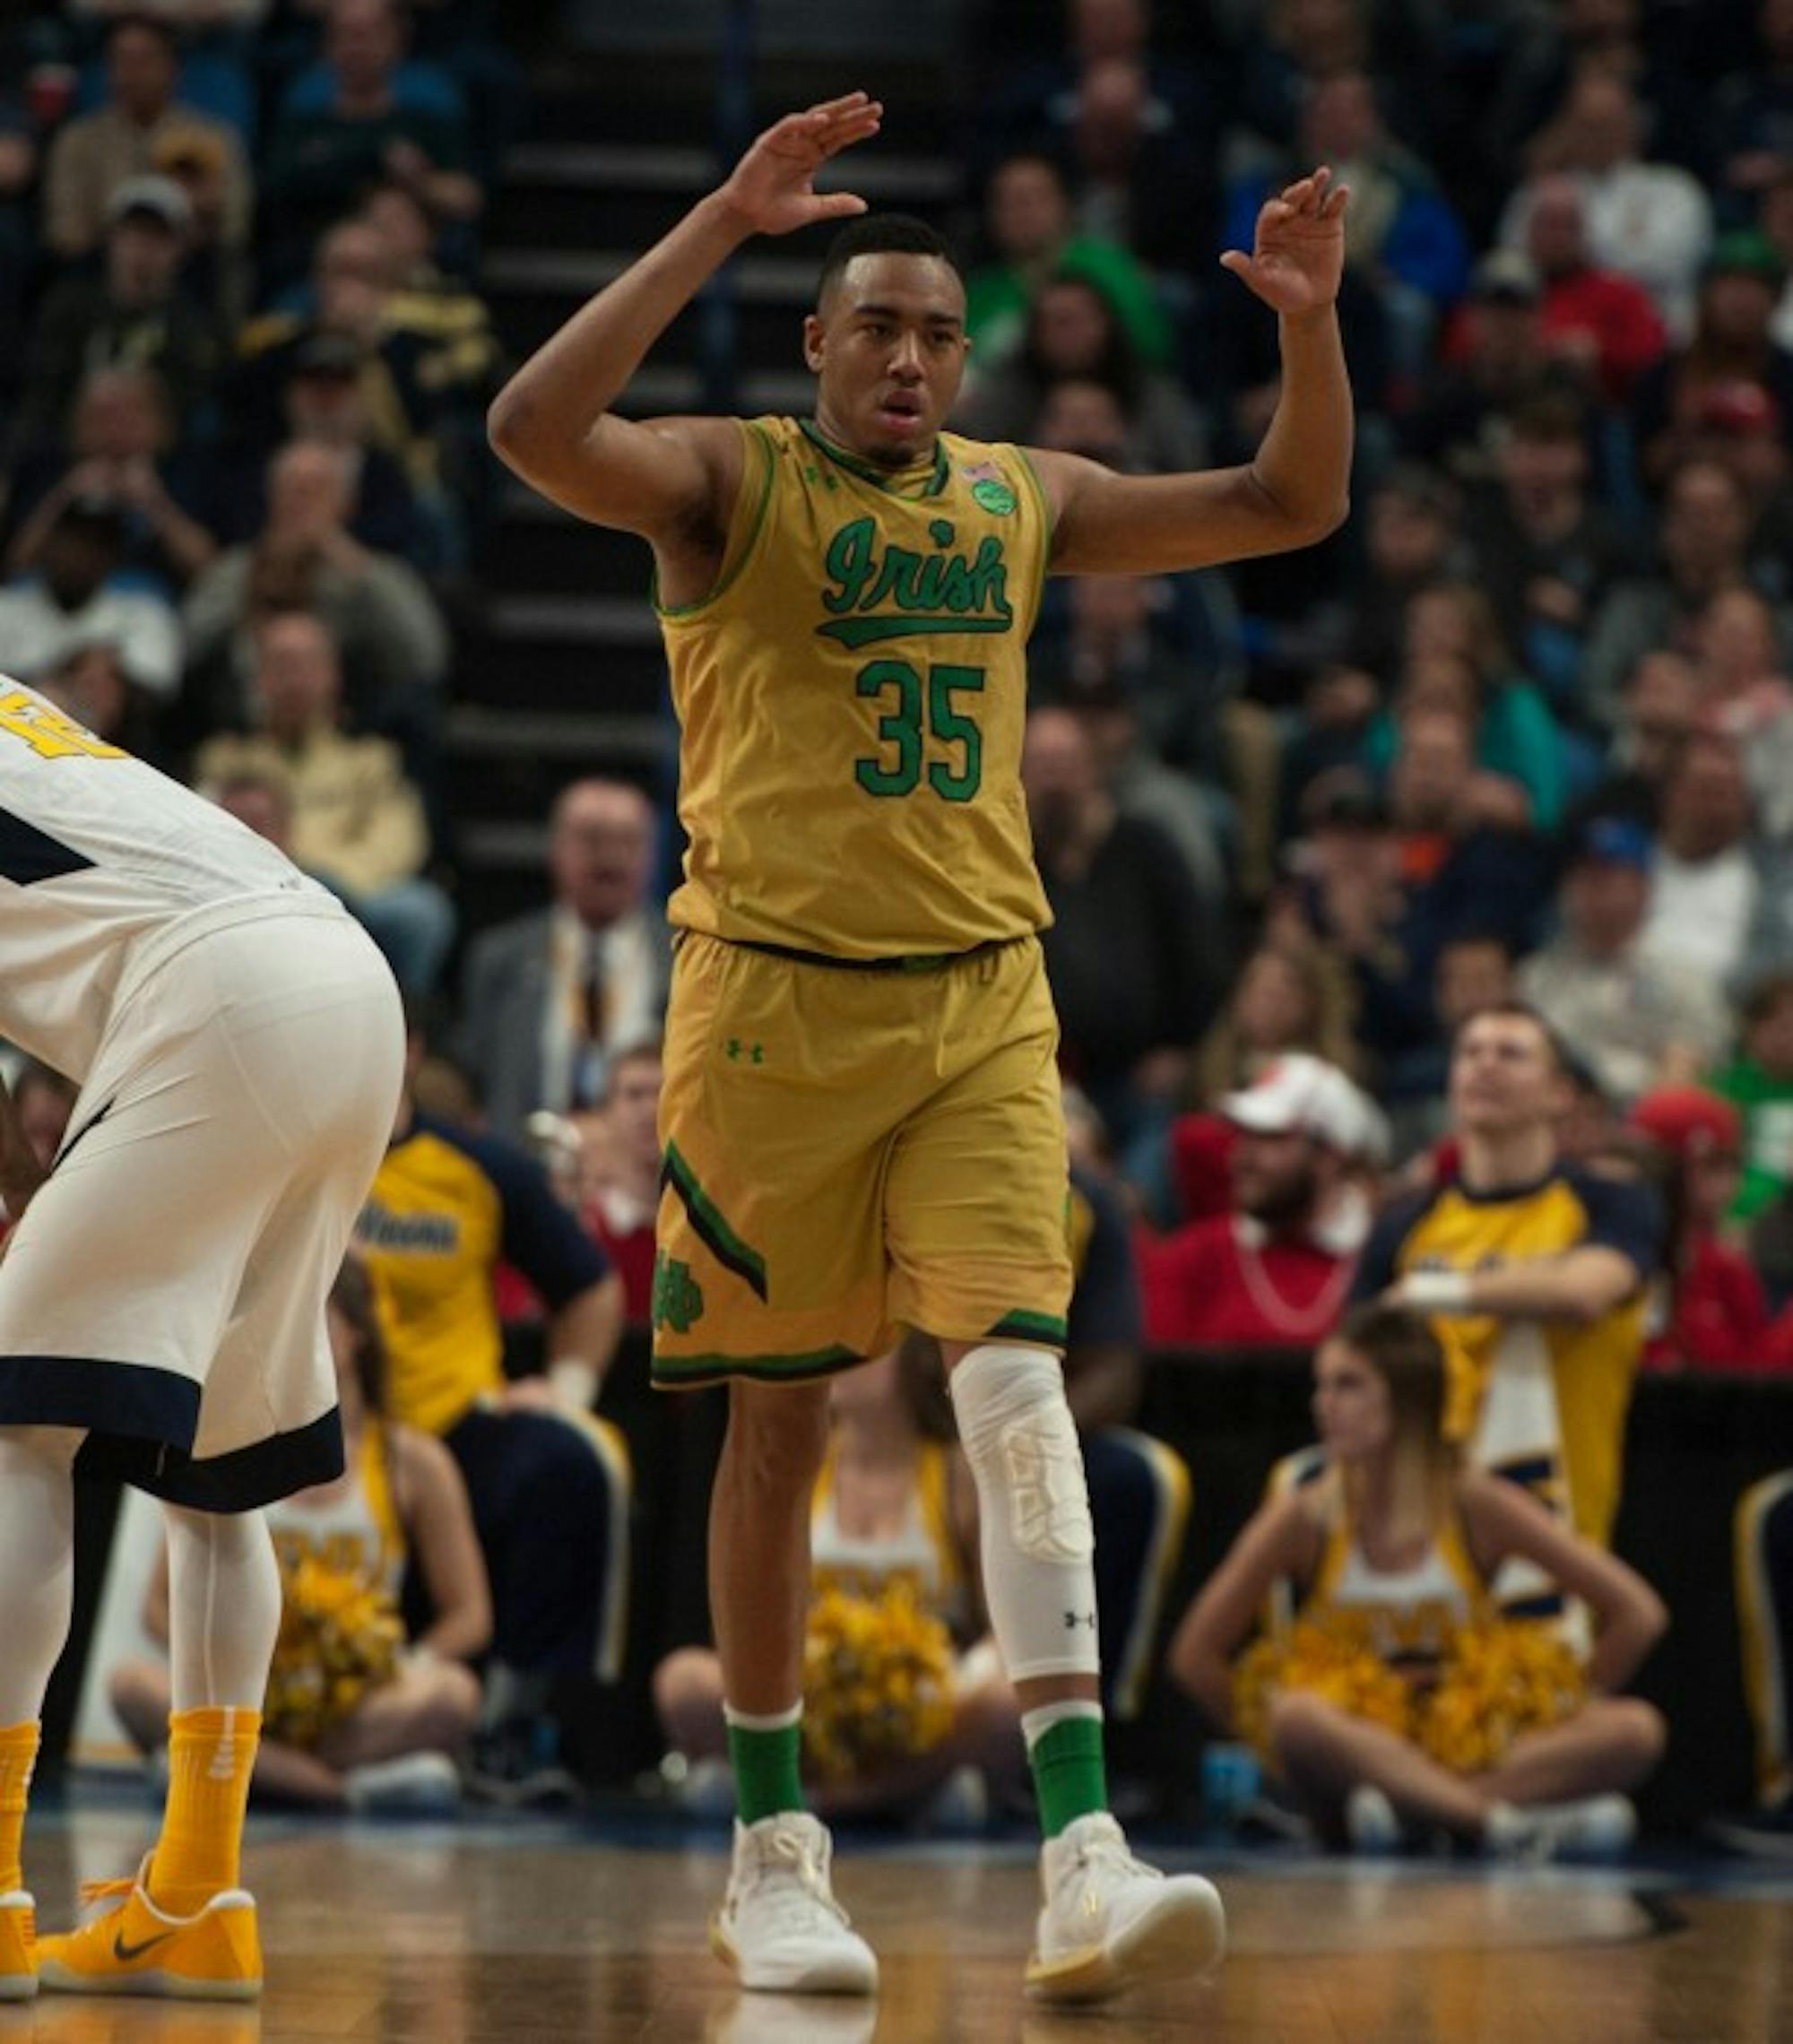 Irish senior forward Bonzie Colson pumps up the crowd during Notre Dame’s 83-71 loss to West Virginia on March 18.